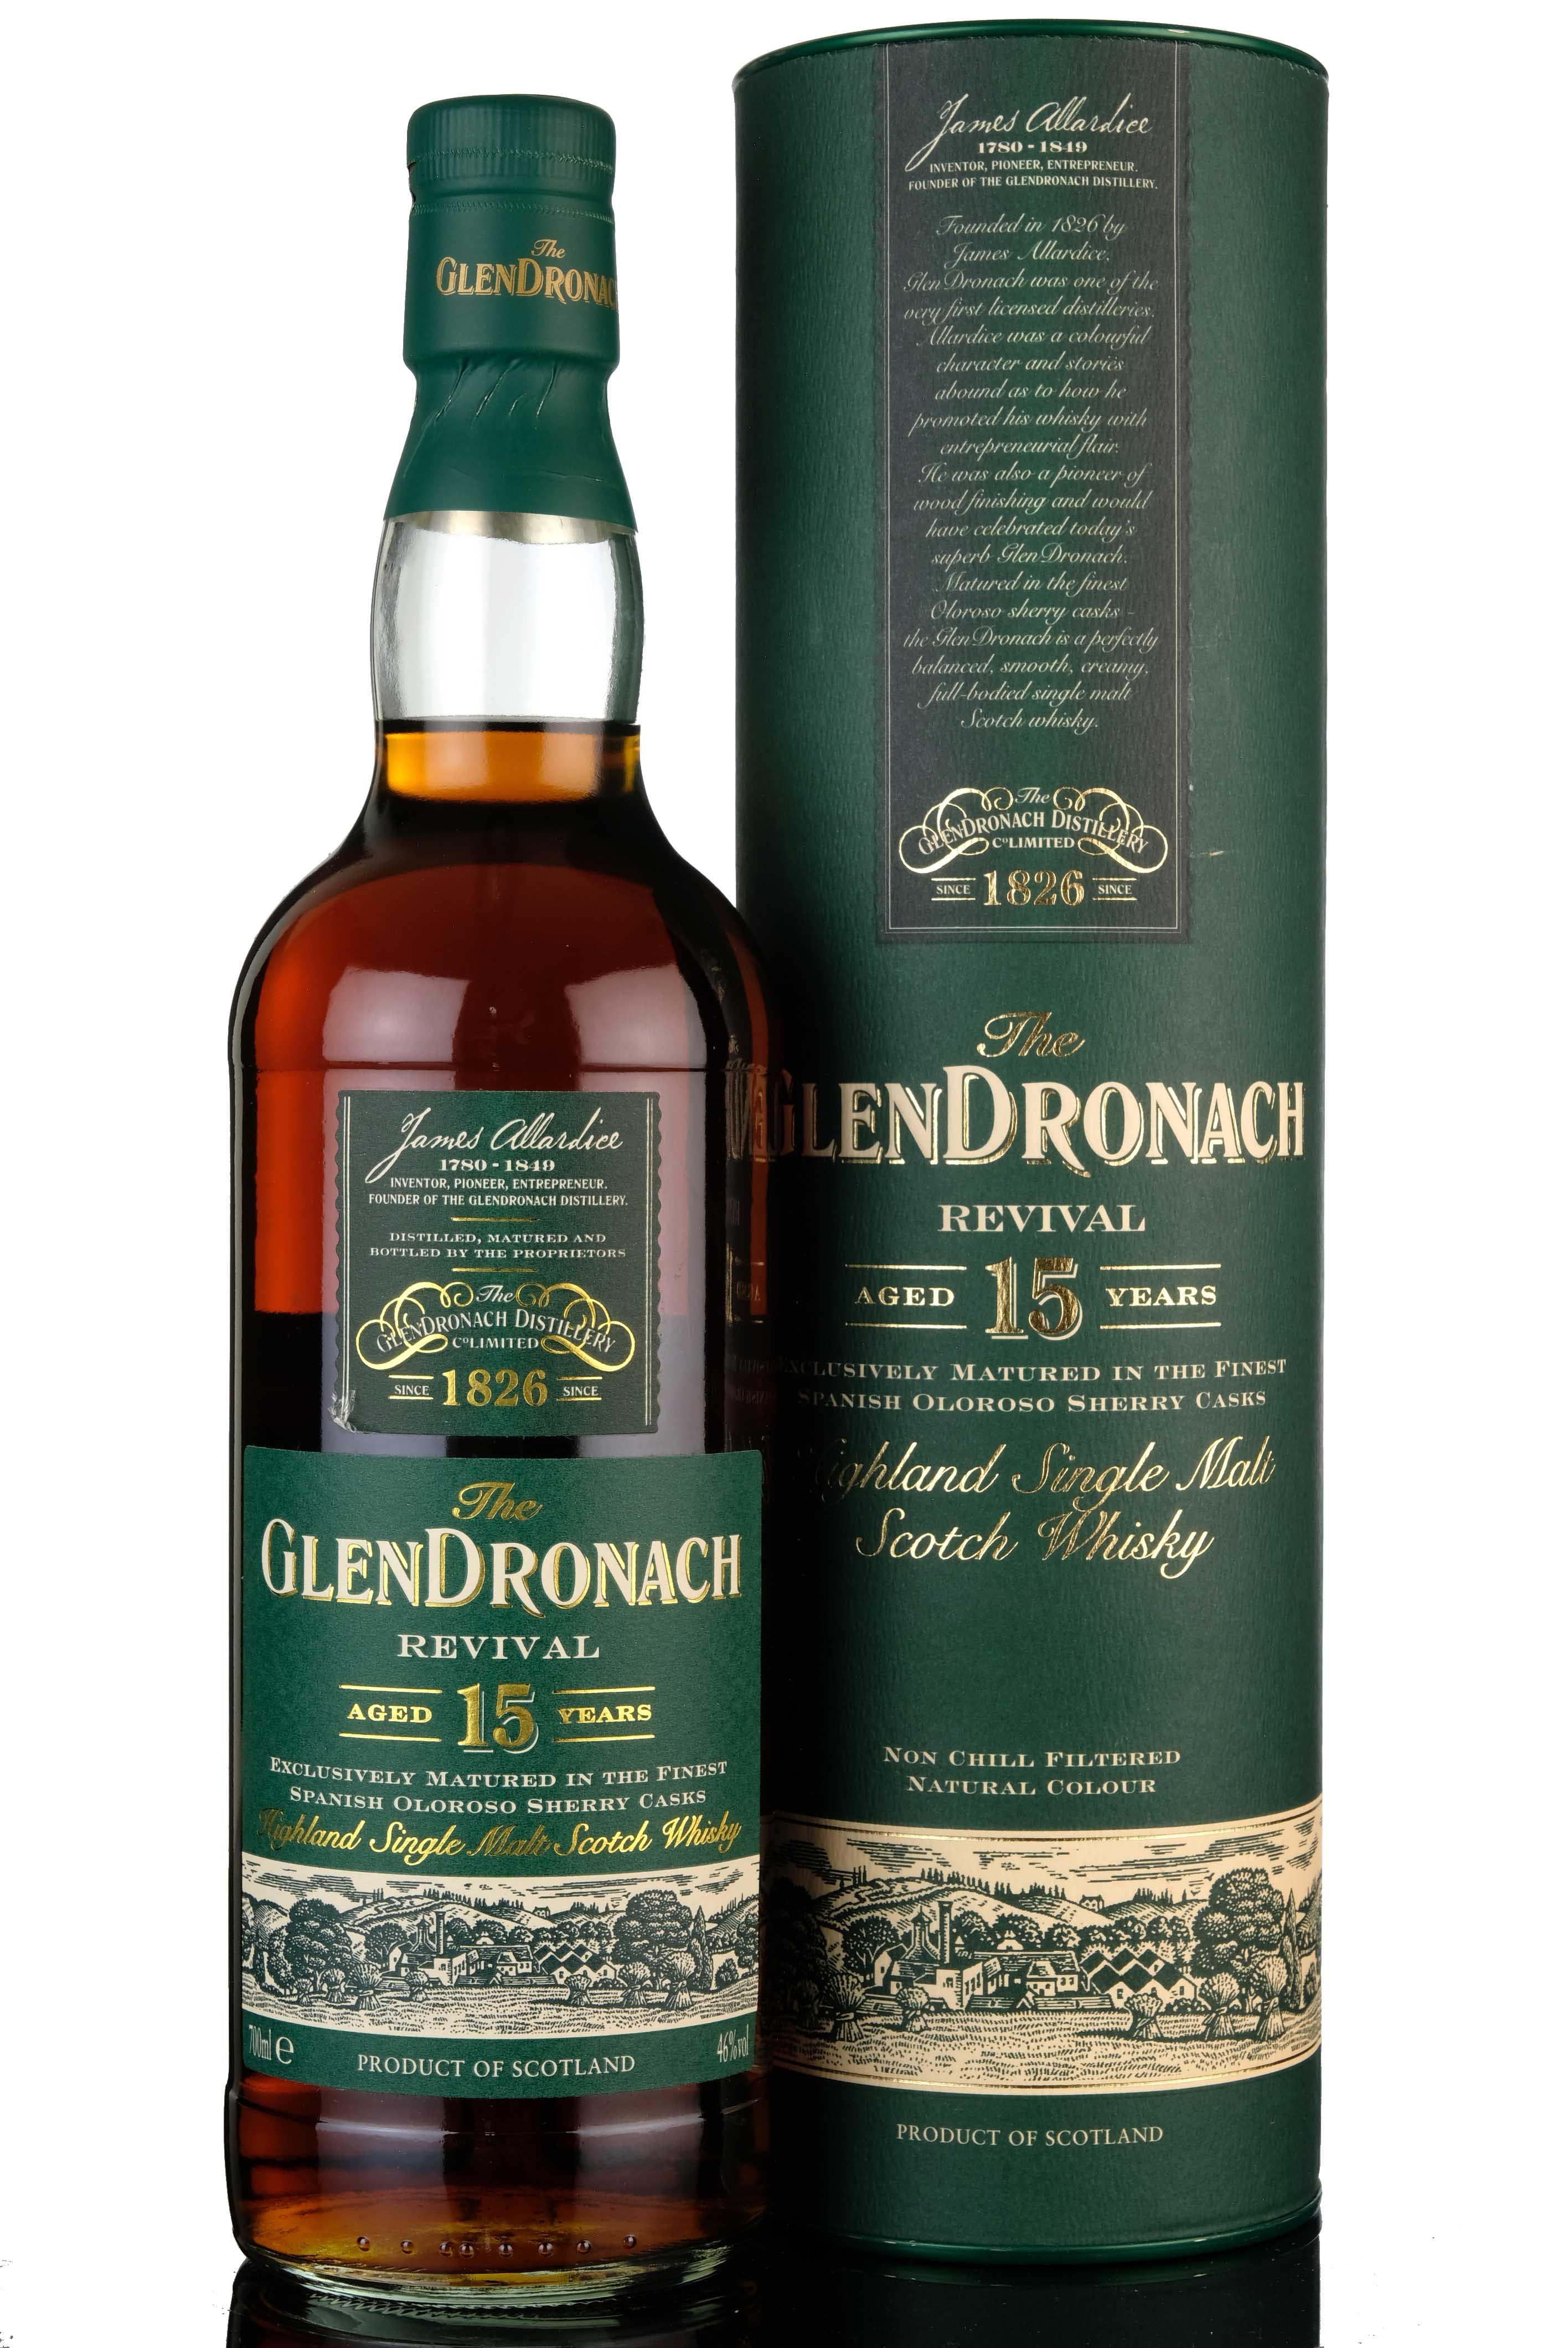 Glendronach 15 Year Old - Revival - 2012 Release